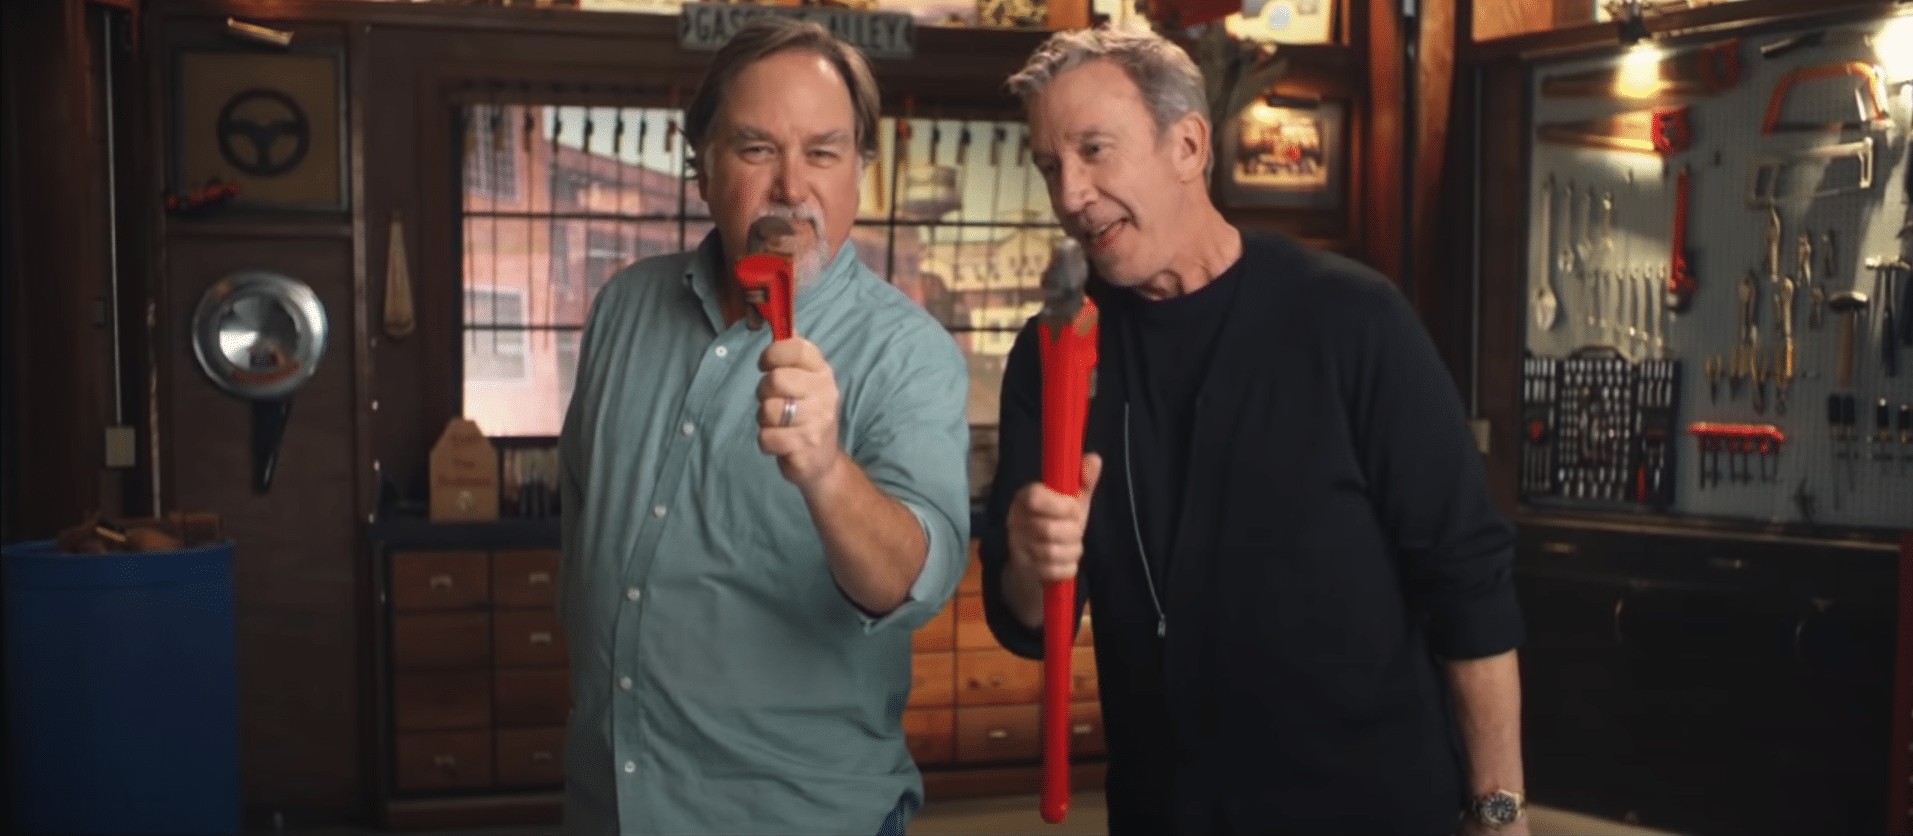 WATCH: Tim Allen And Richard Karn's New Show 'Assembly Required' Official Promo Video